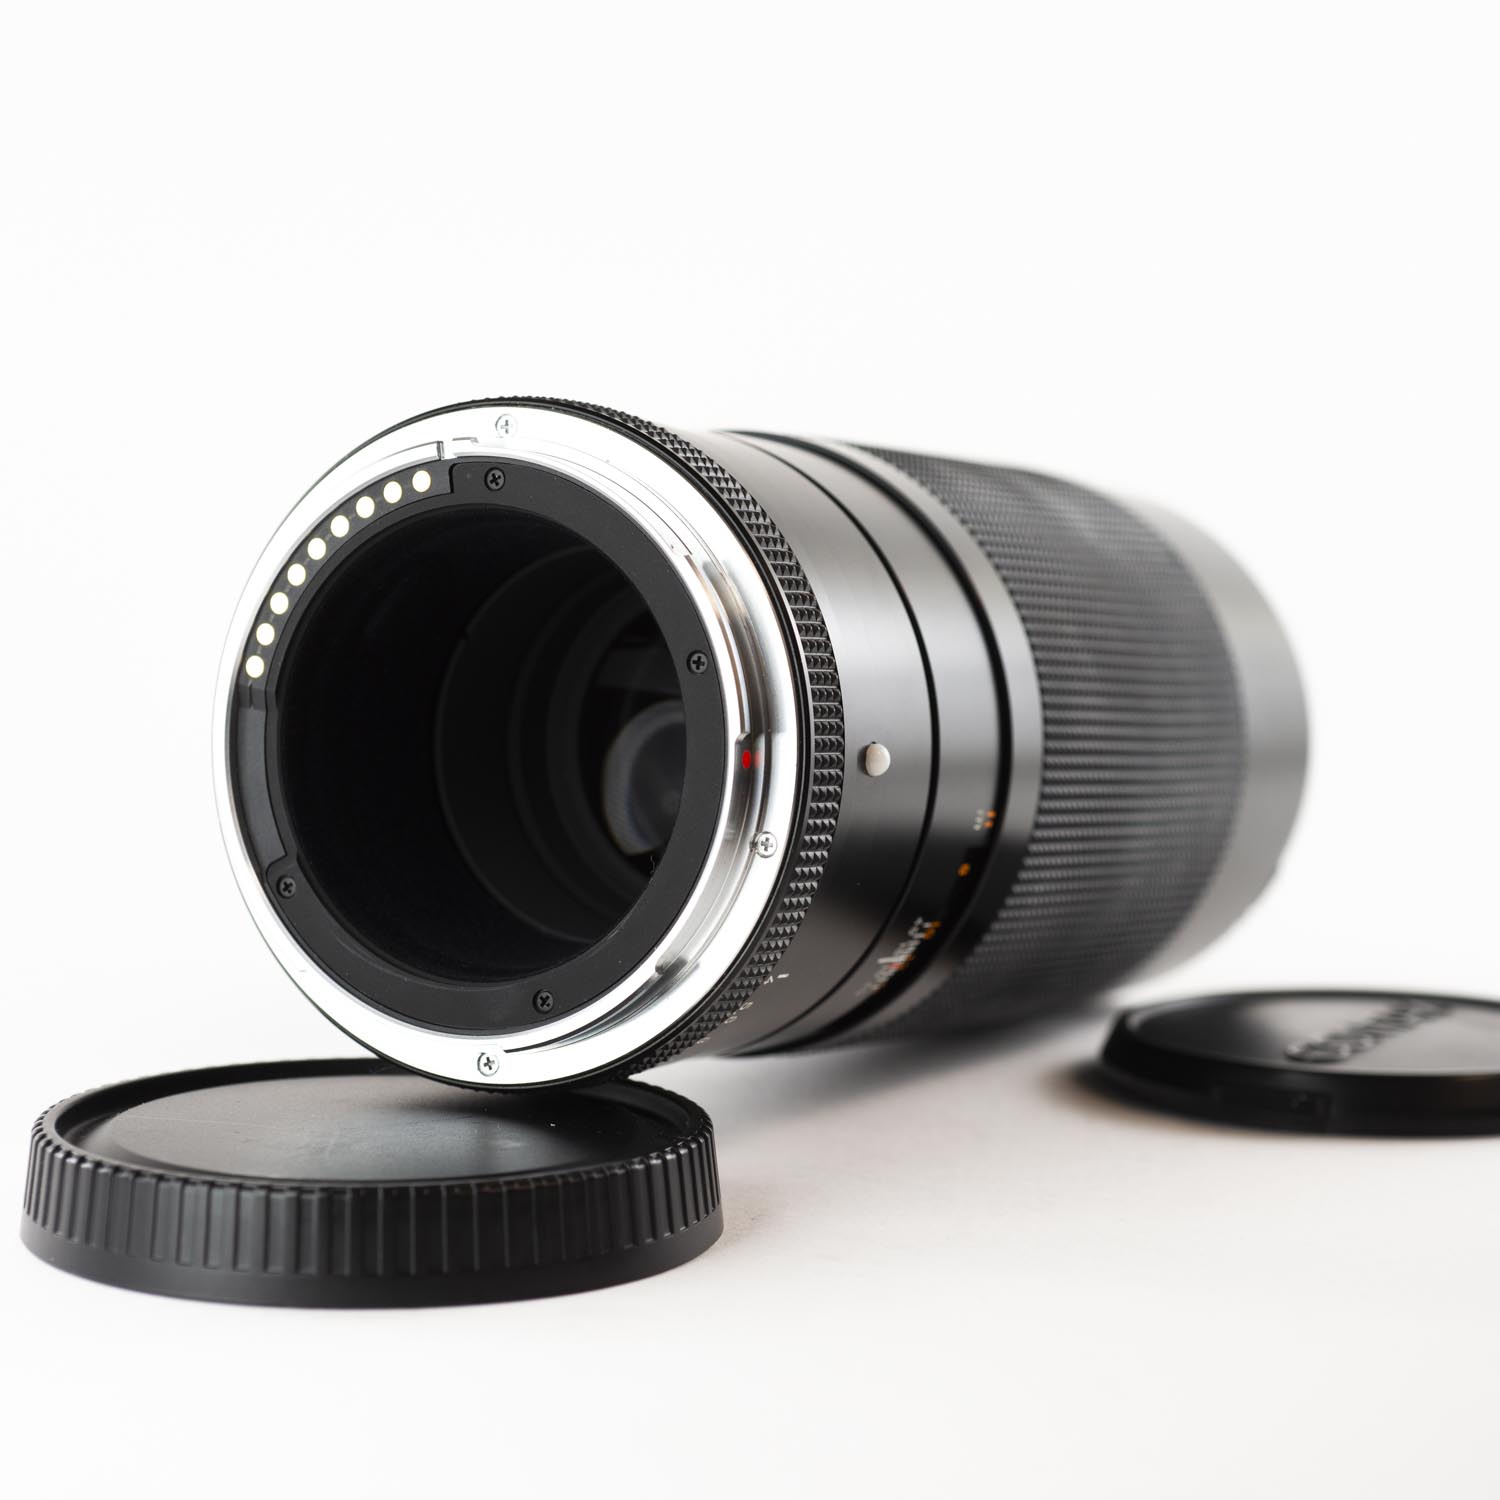 Carl Zeiss Sonnar T* 210mm f/4 for Contax 645 